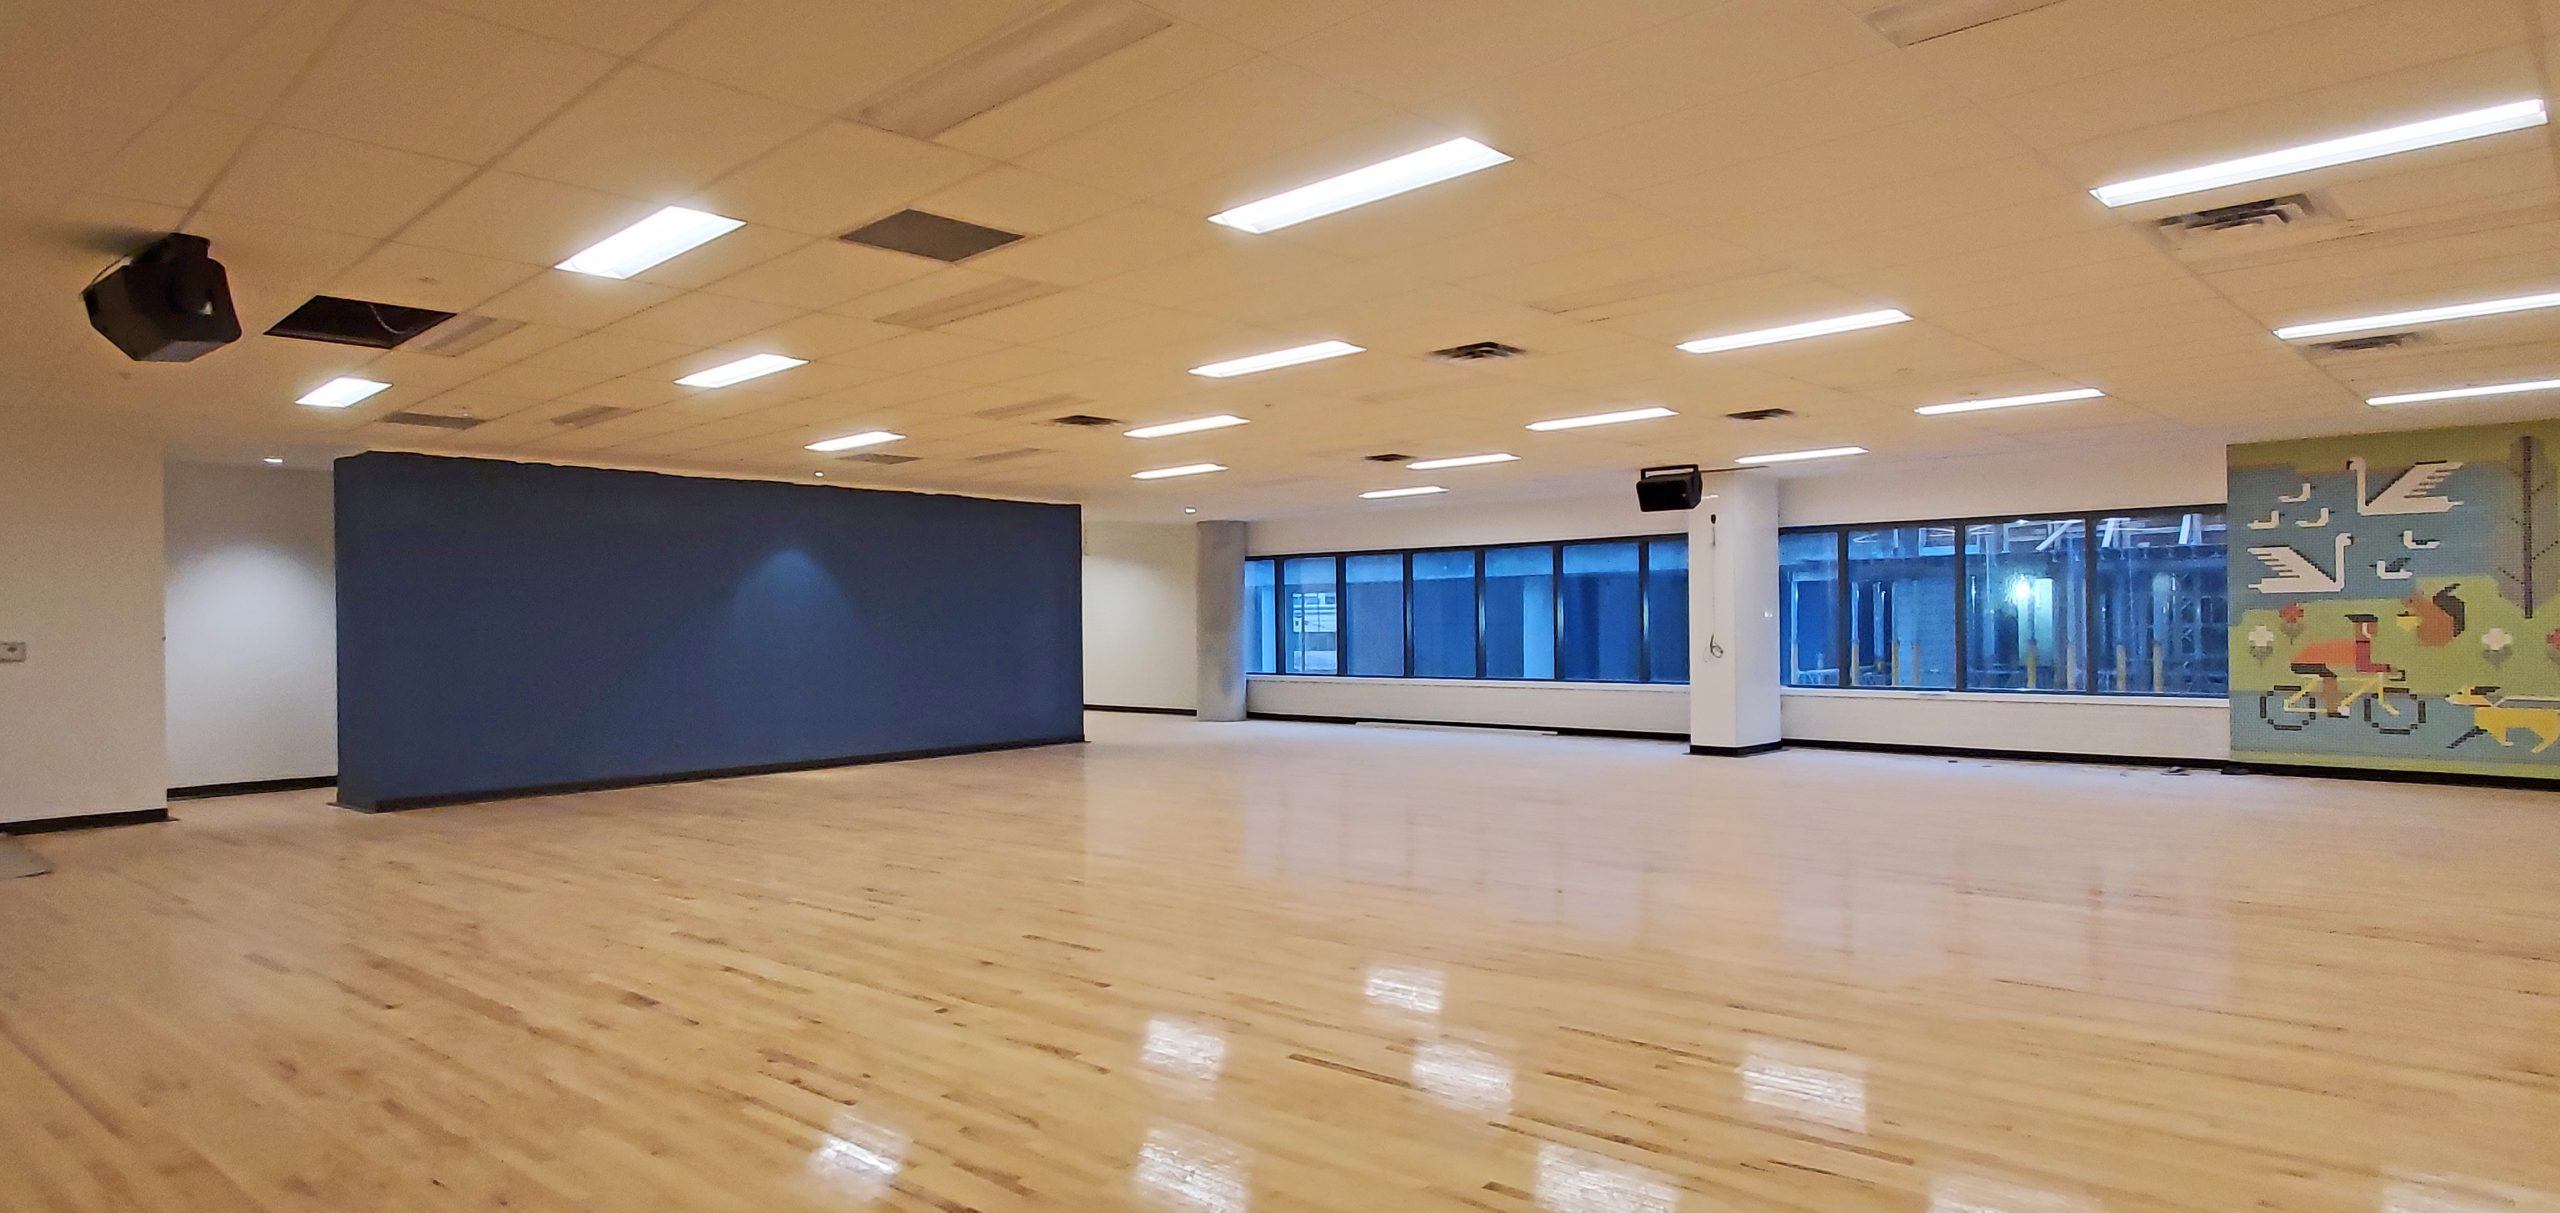 A photo of the indoor multi-purpose room at One Yonge Community Recreation Centre which shows a navy blue feature wall separating the entrance to the room and adjacent hallway, shiny wood floors, two overhead speakers, and a mosaic wall design of animals and a cyclist beside the windows.